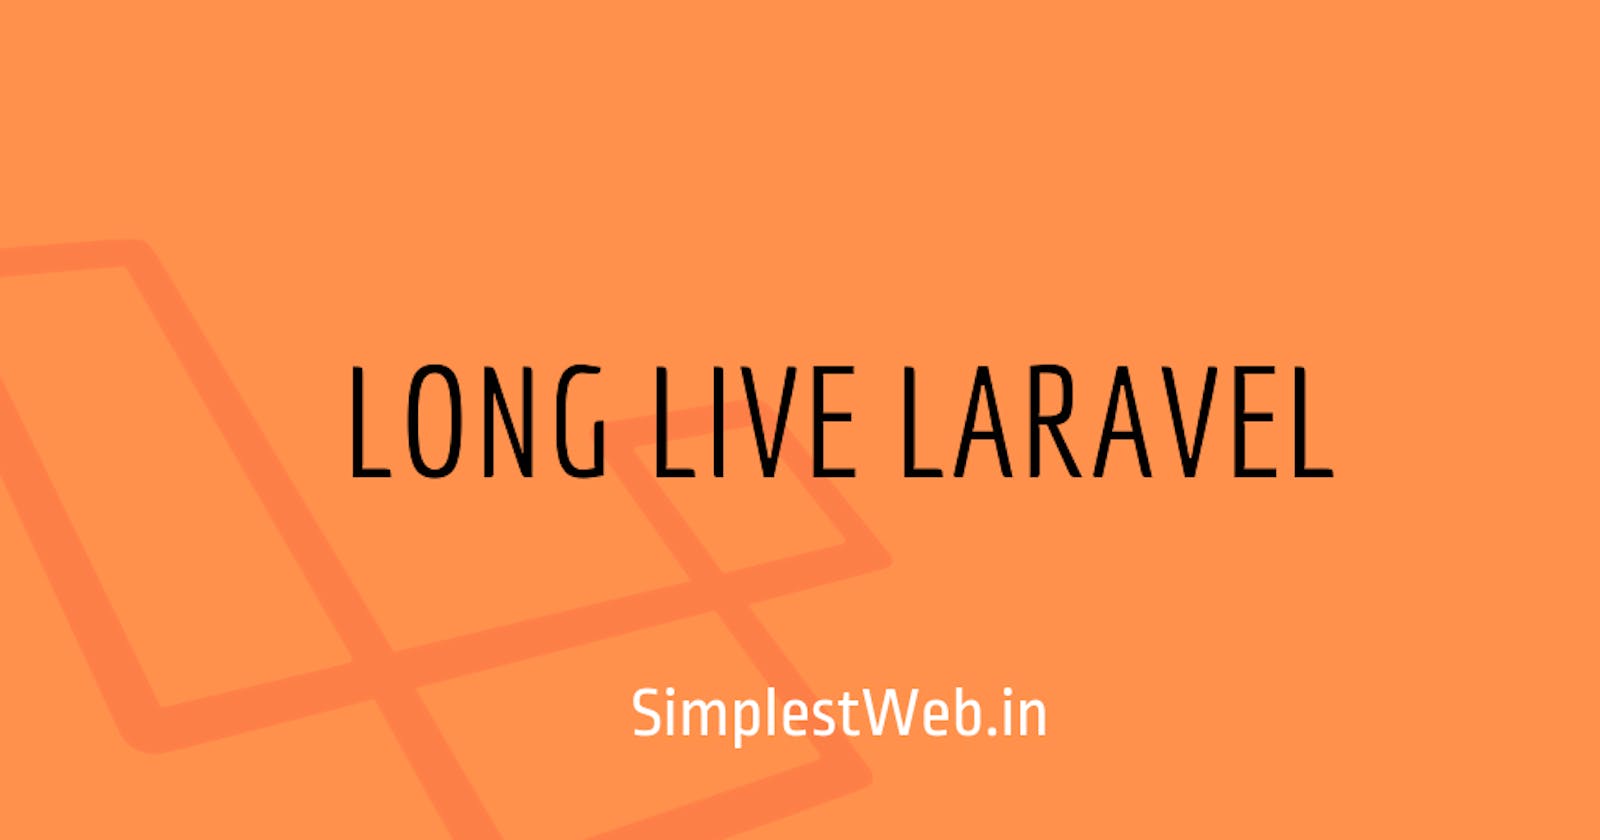 Building my own blog with Laravel in a day